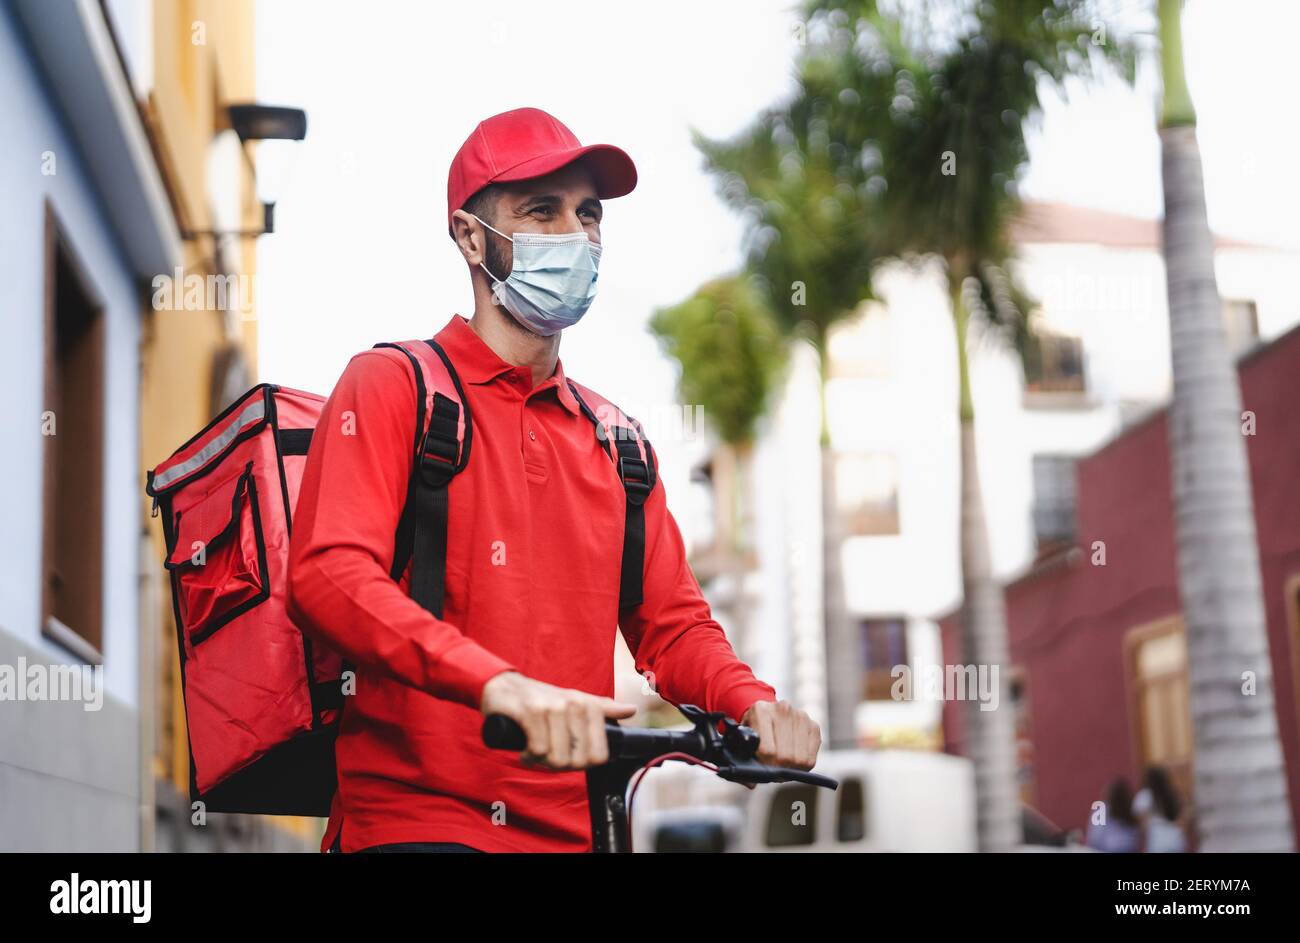 Rider man delivering meal with electric scooter in the city while wearing face mask during corona virus outbreak Stock Photo